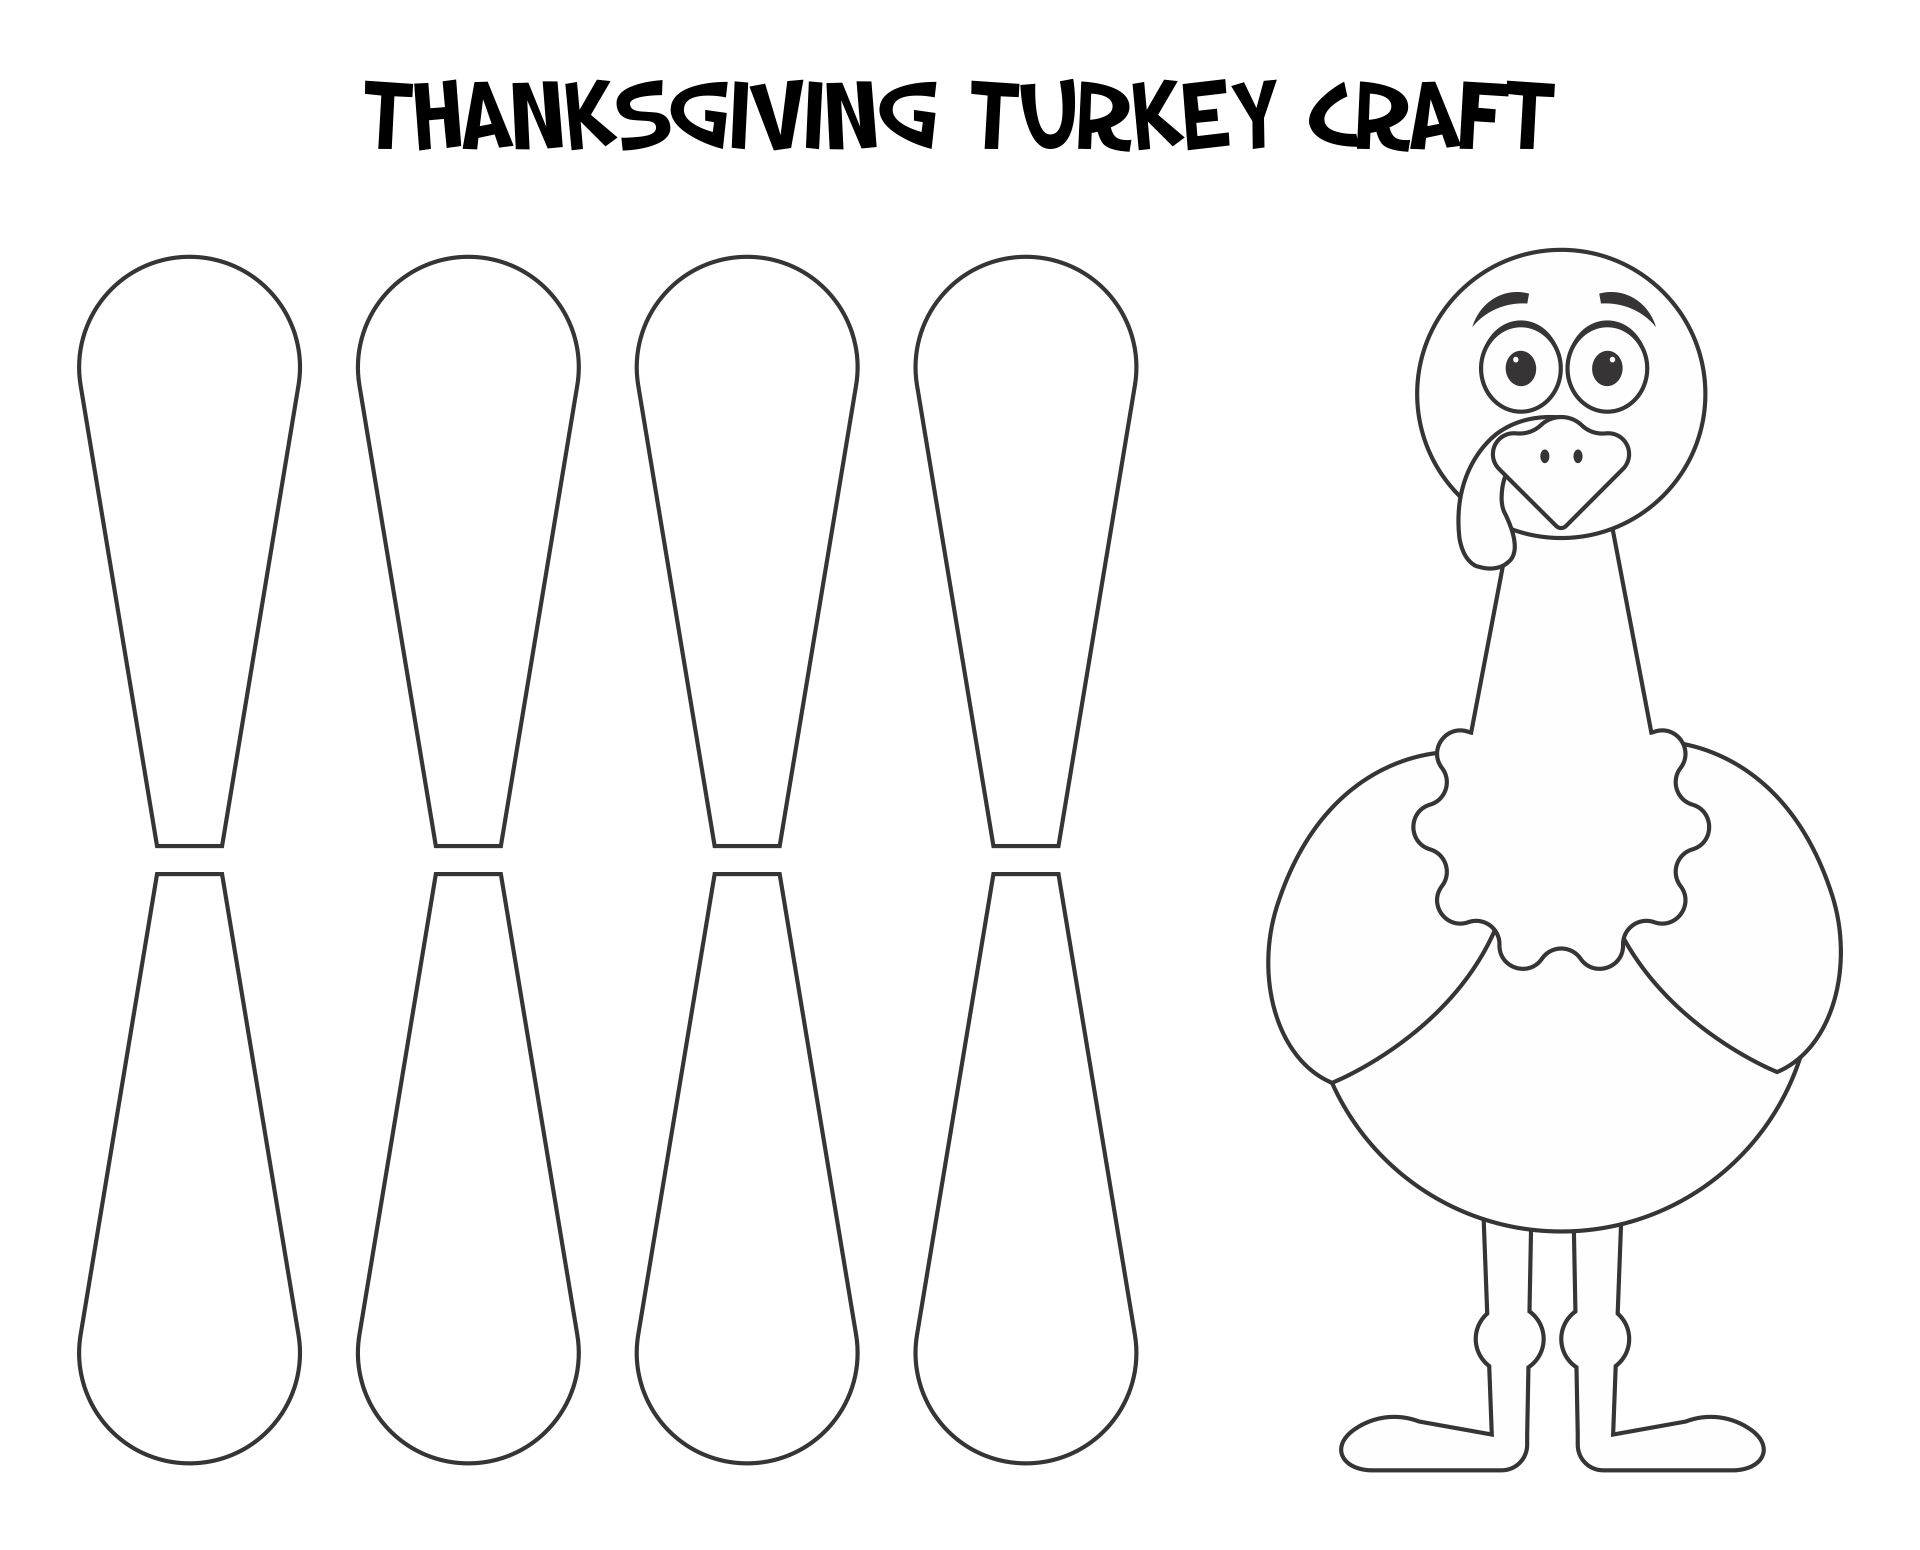 Turkey Printable Craft Using A Tiny Amount Of White Glue, Attach It